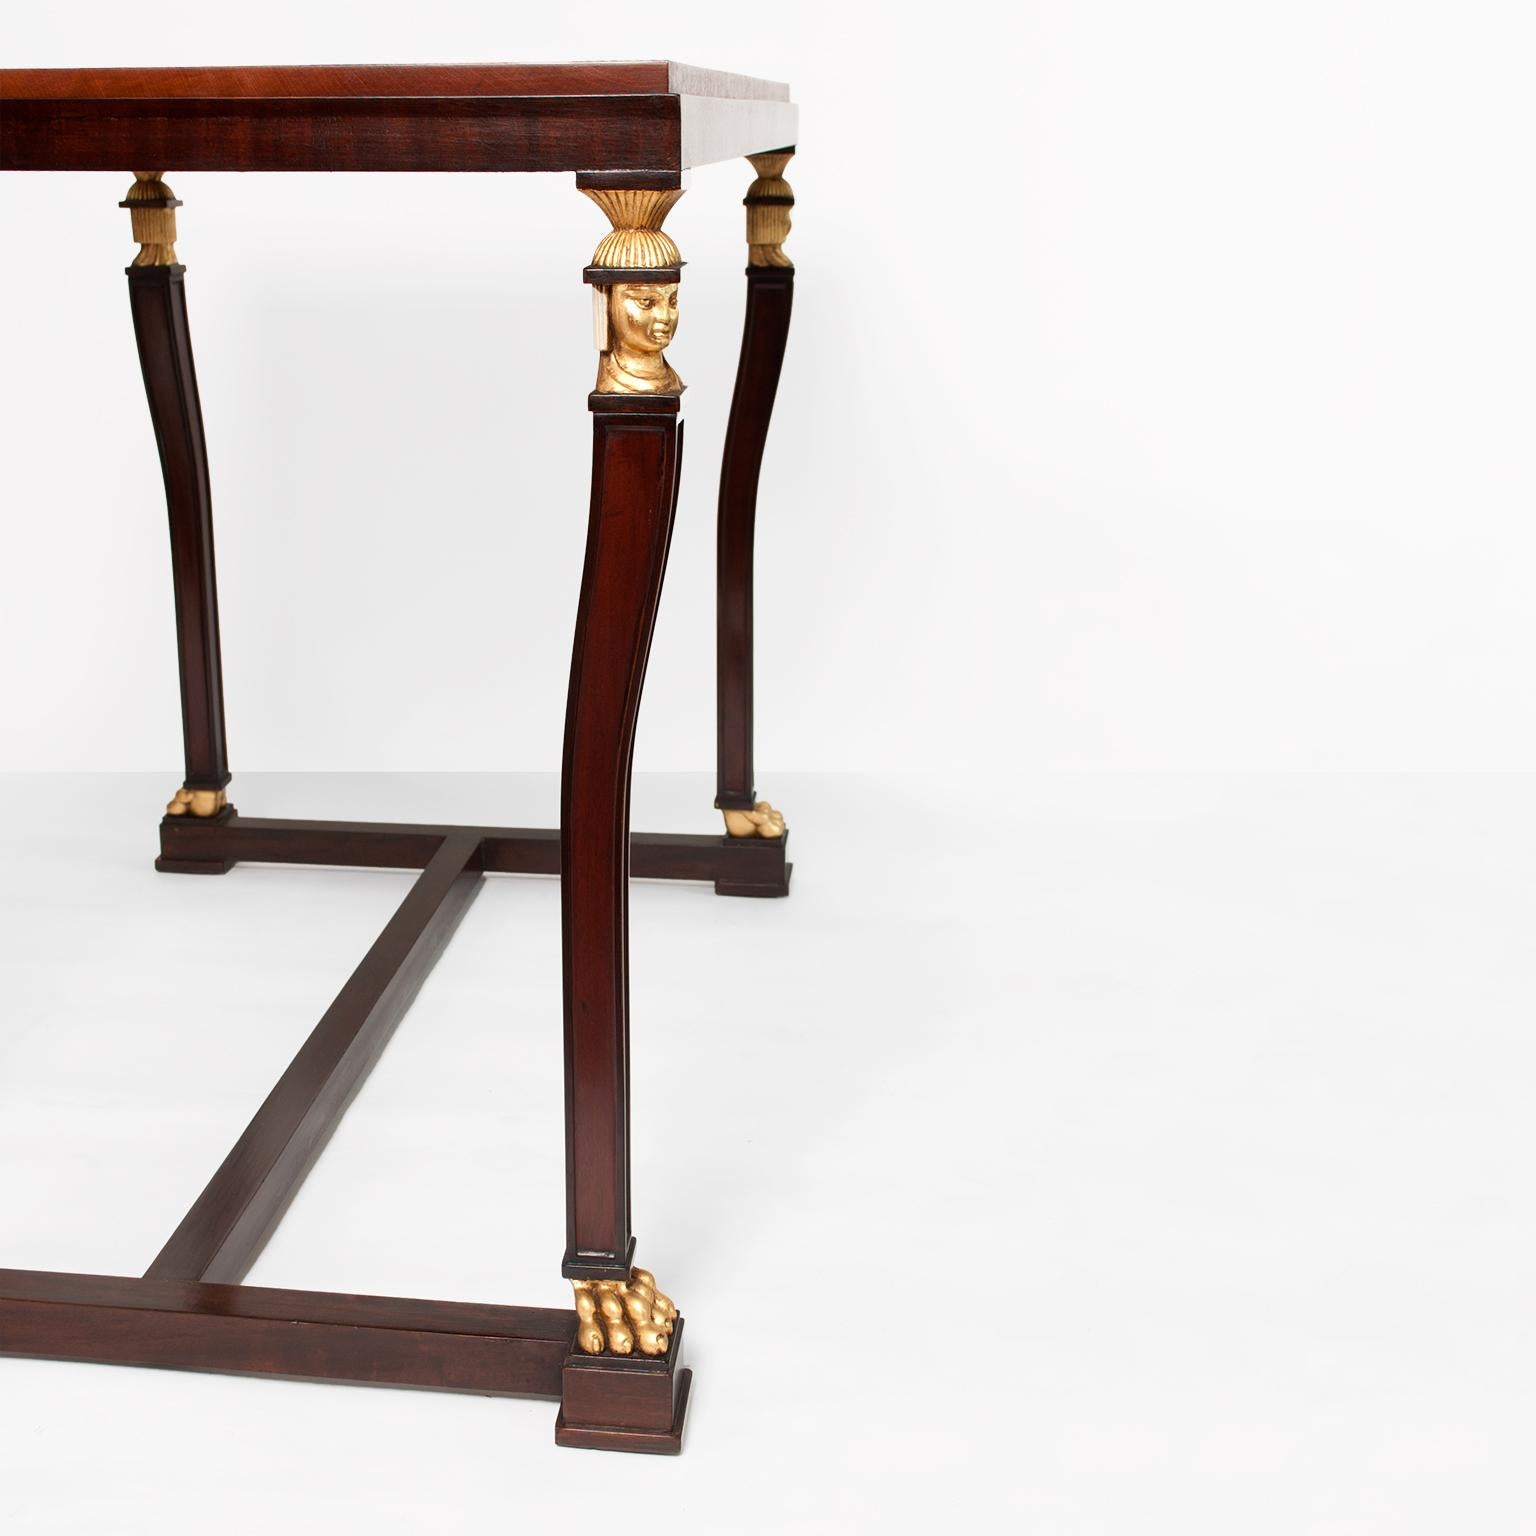 20th Century Scandinavian Modern Mahogany Console Table with Parcel-Gilt Carved Caryatids